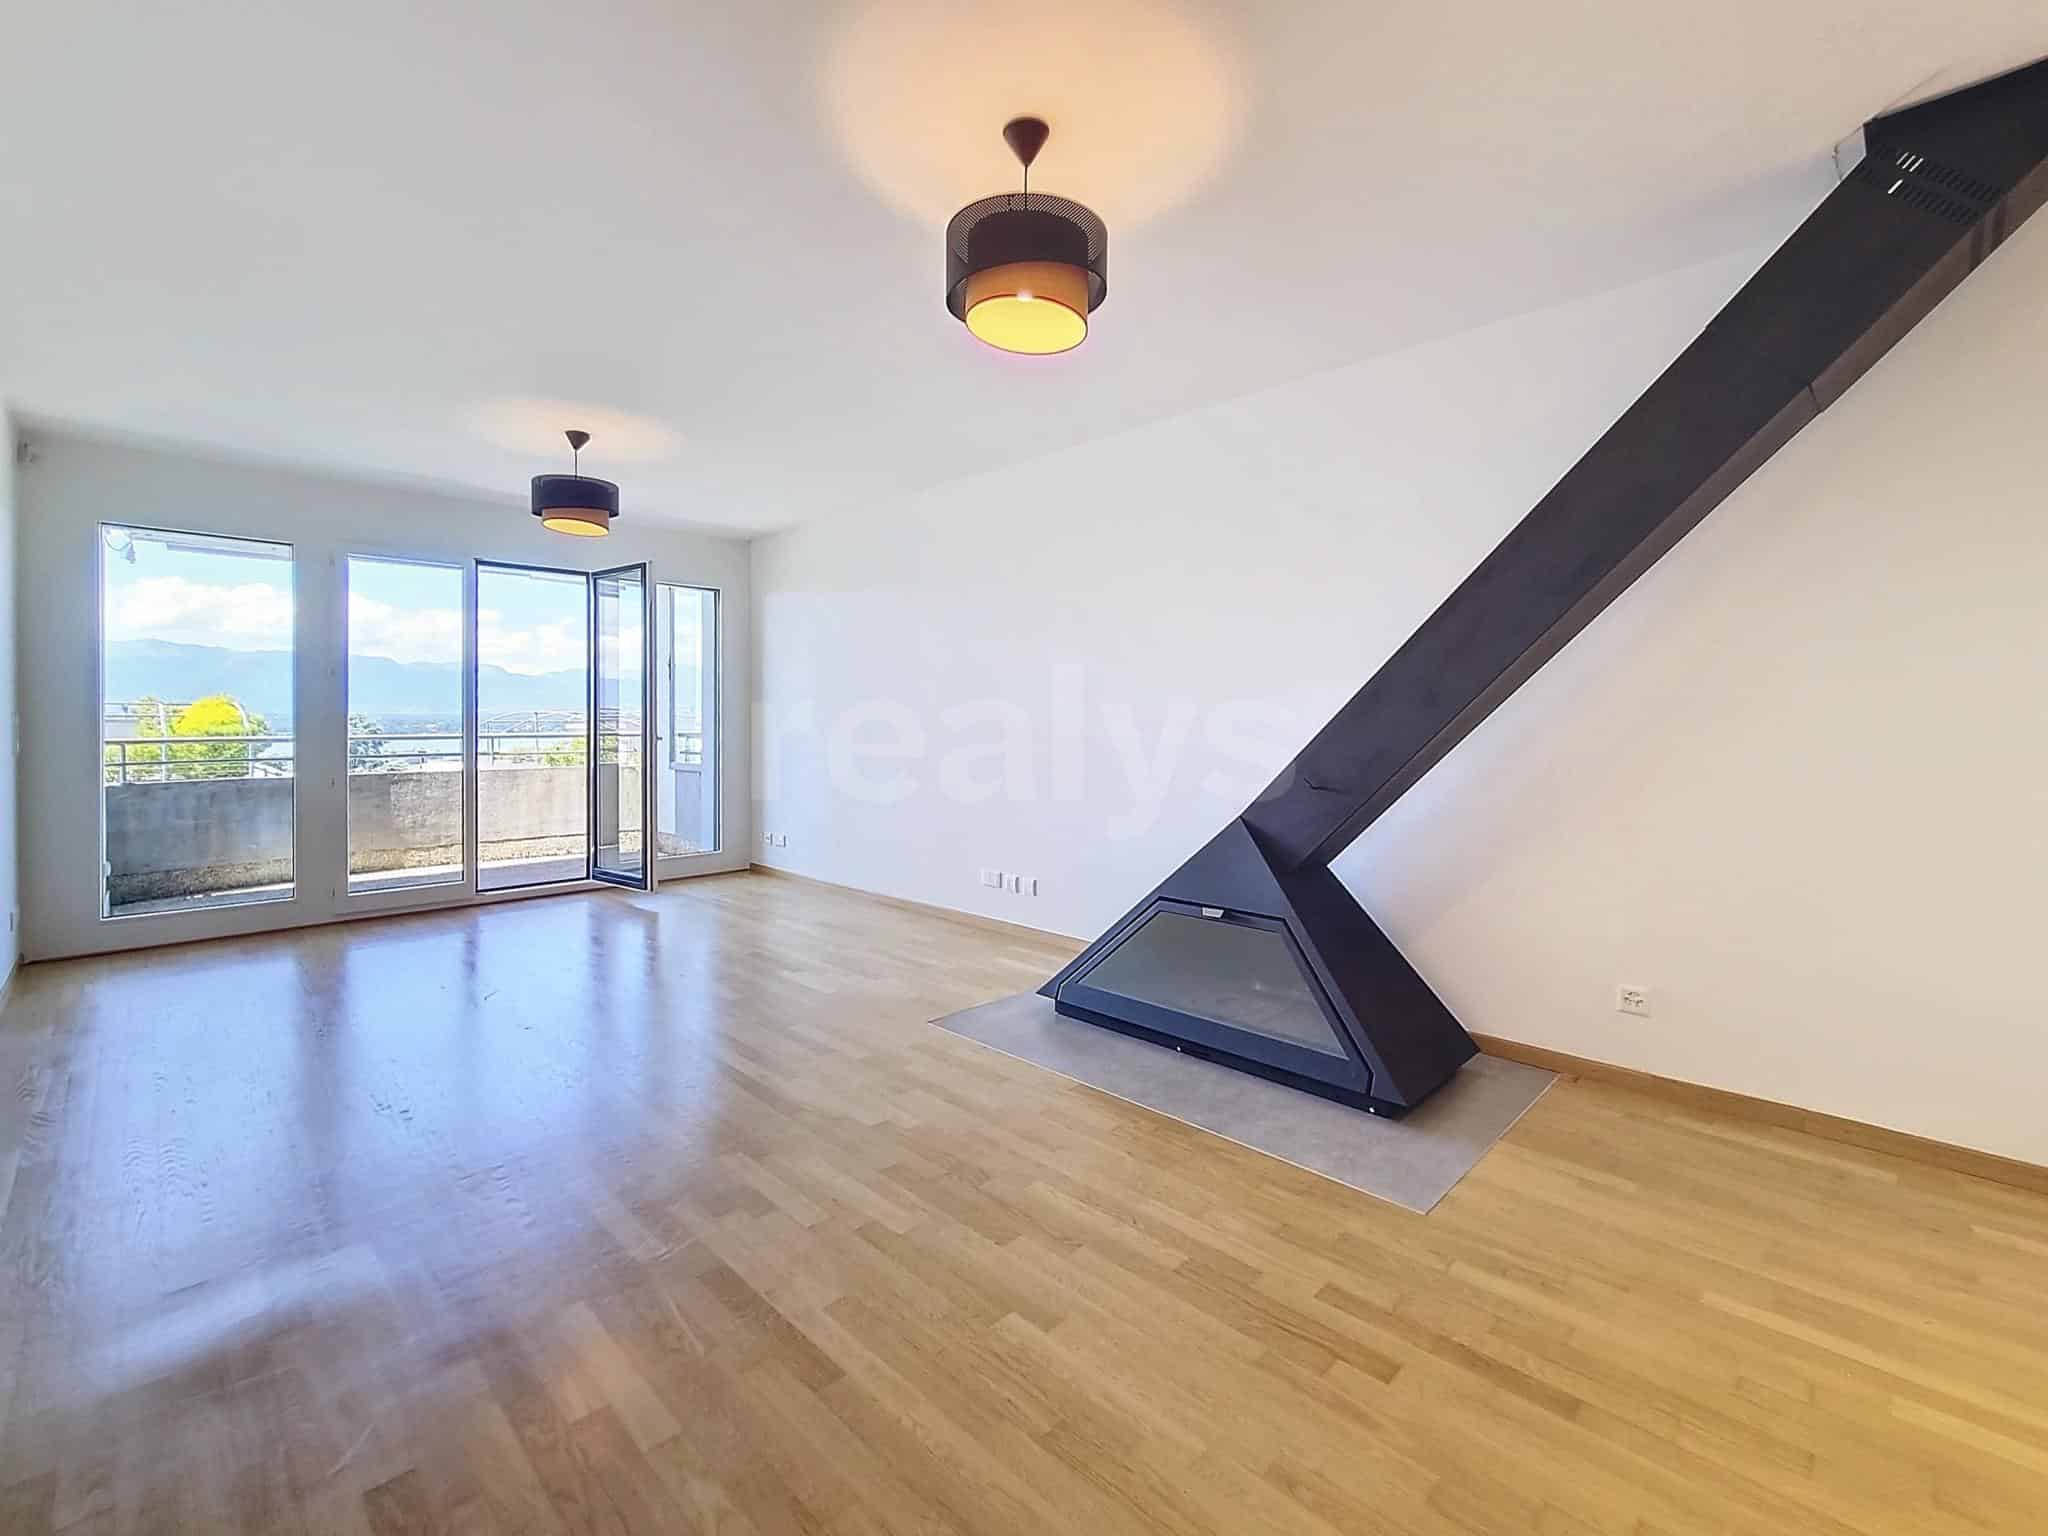 PrivaliaMagnificent flat with roof terrace and lake view